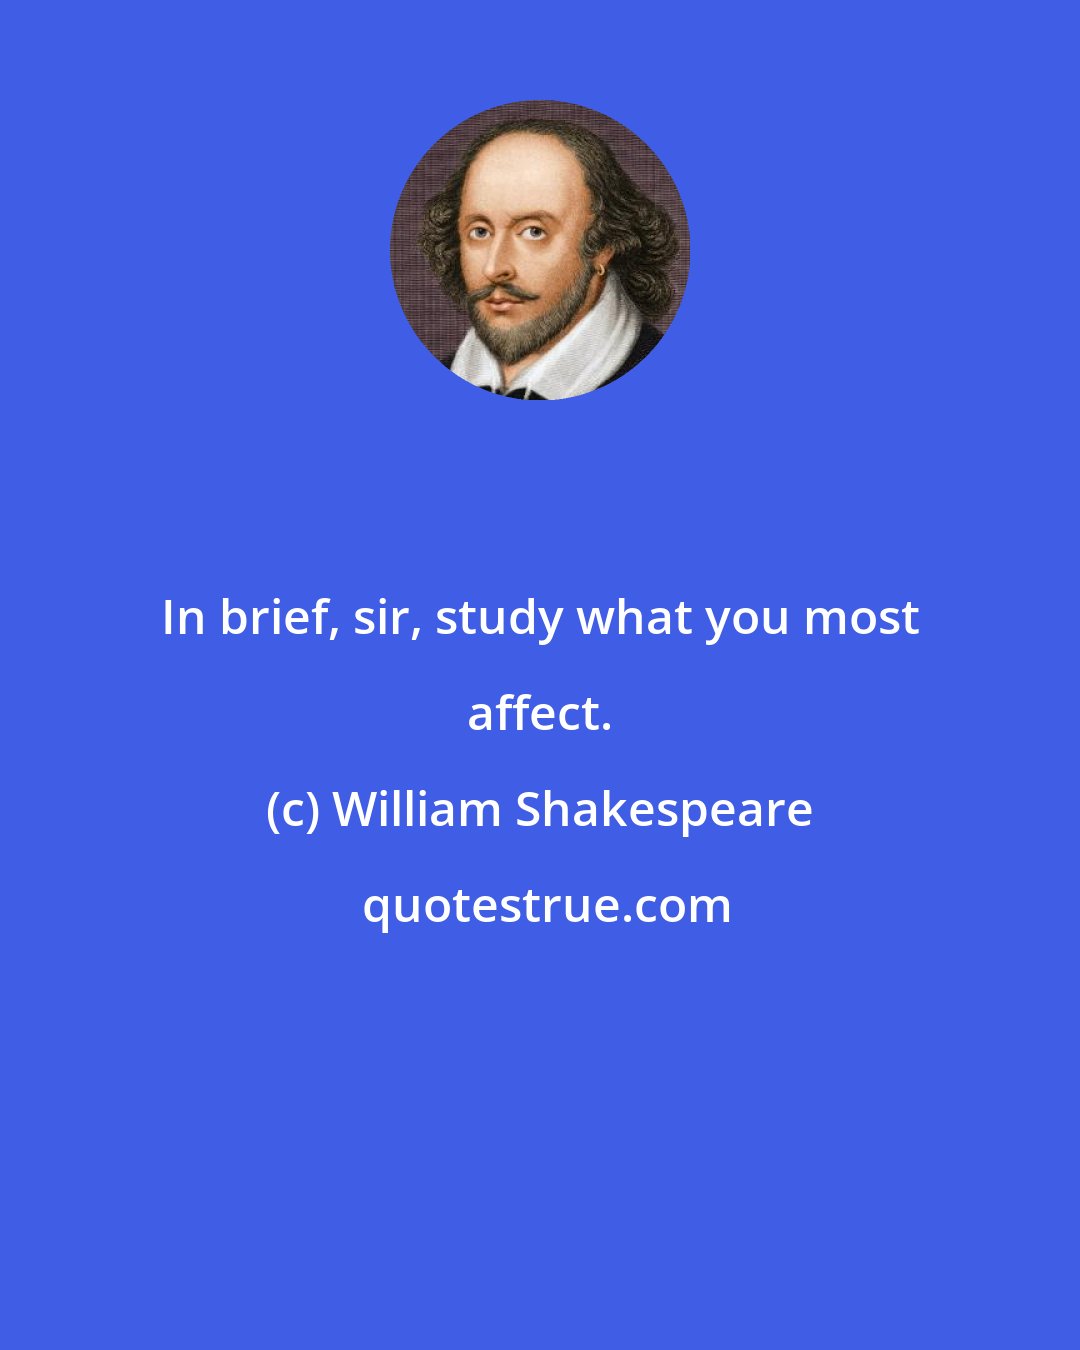 William Shakespeare: In brief, sir, study what you most affect.